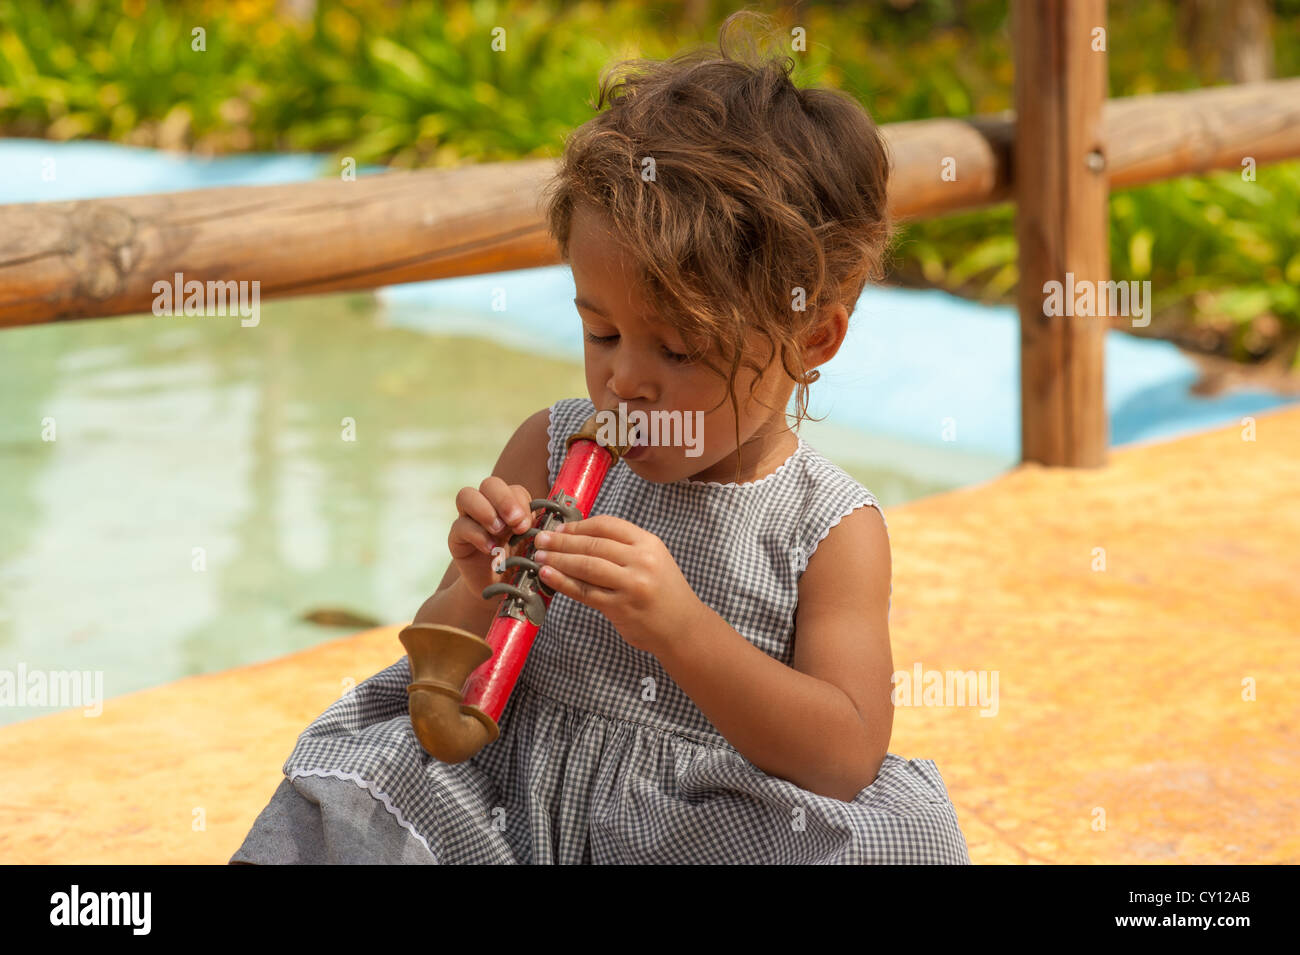 Cute Hispanic girl playing with a toy saxophone Stock Photo